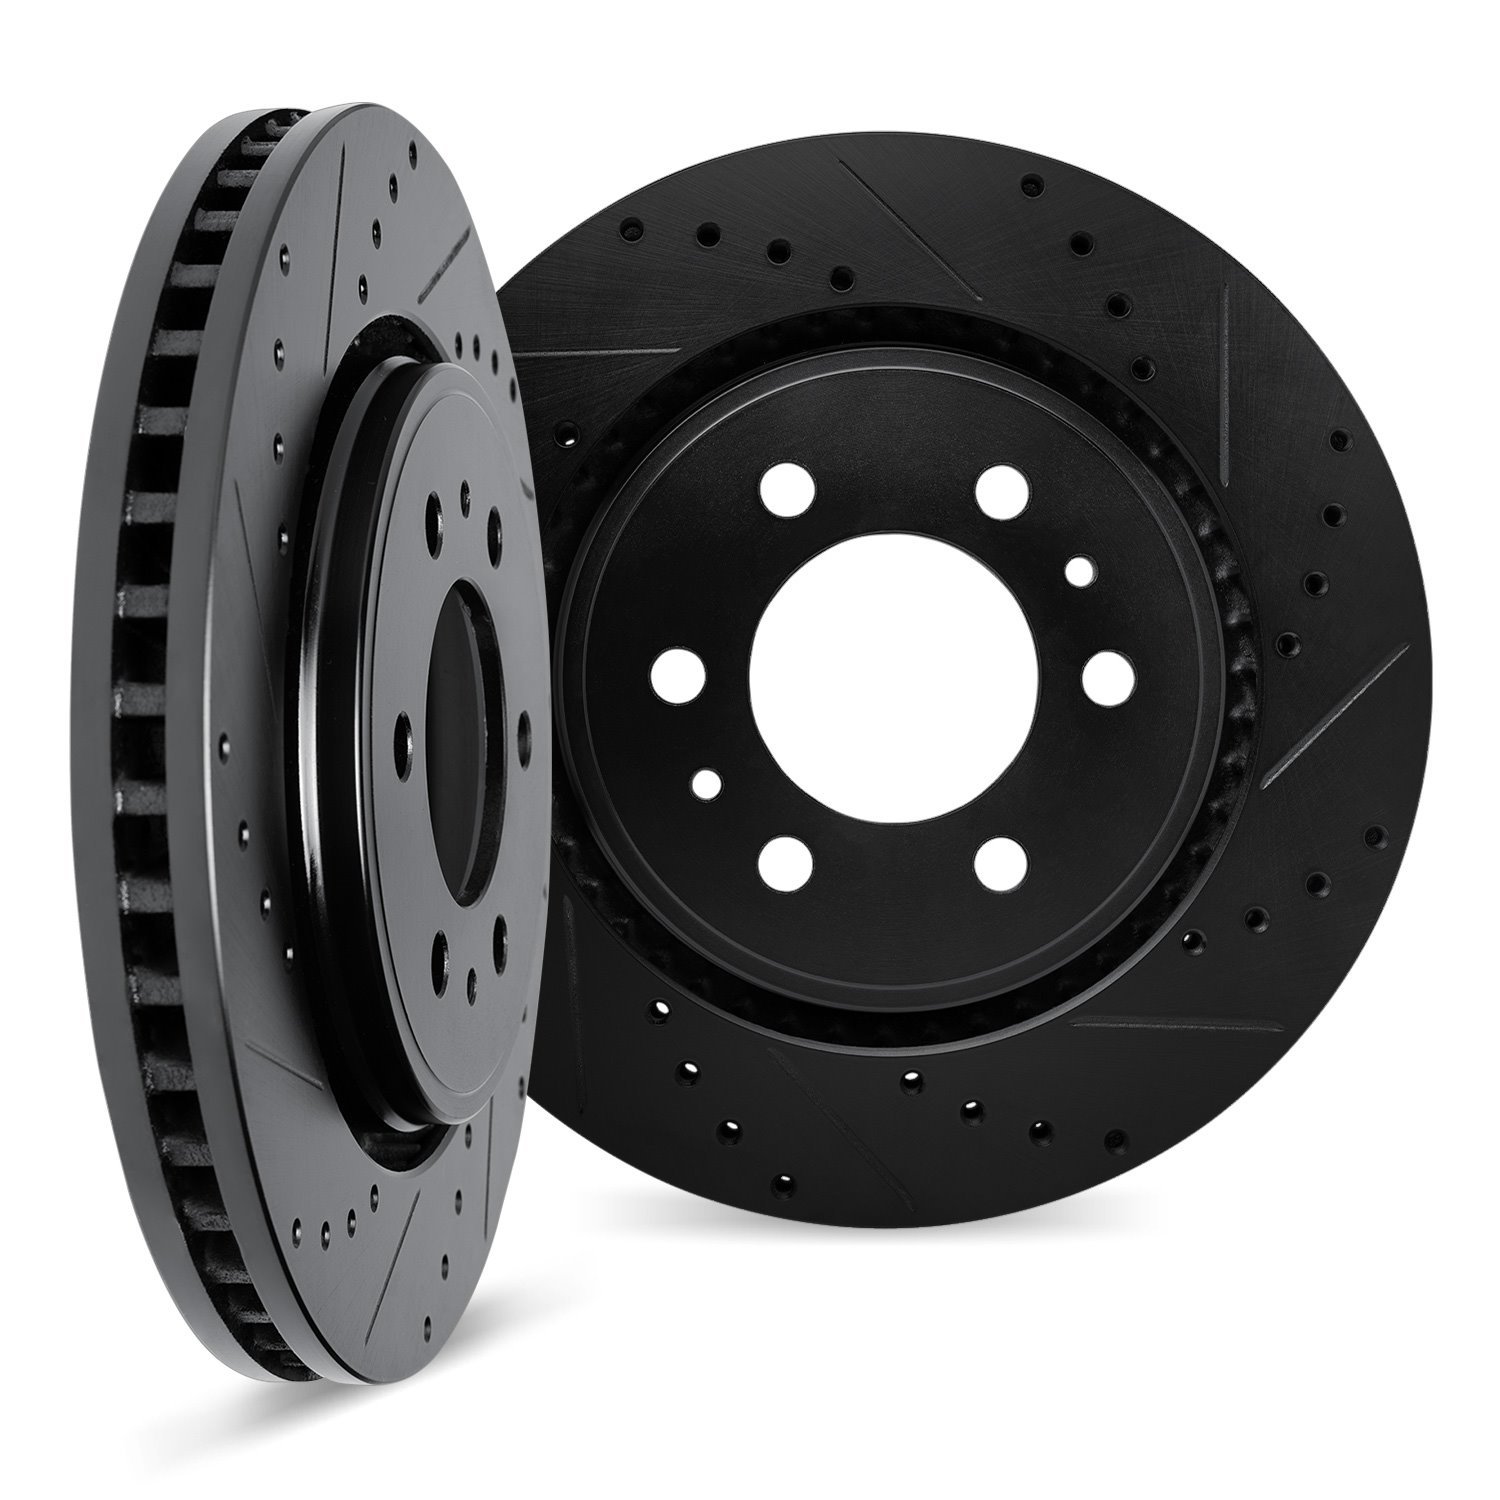 Drilled/Slotted Brake Rotors [Black], Fits Select